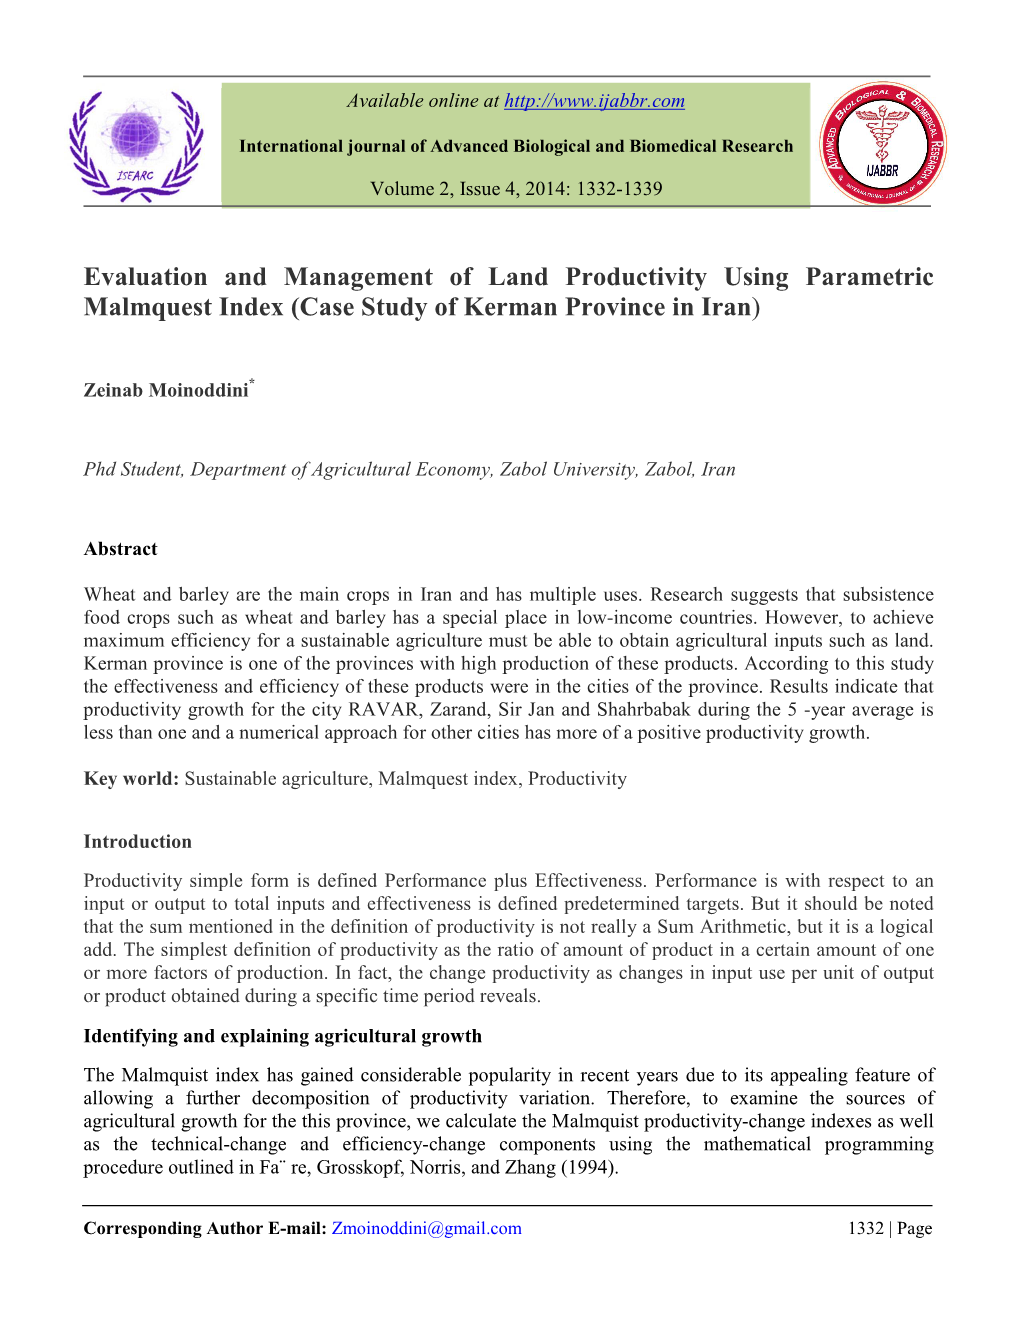 Evaluation and Management of Land Productivity Using Parametric Malmquest Index (Case Study of Kerman Province in Iran)